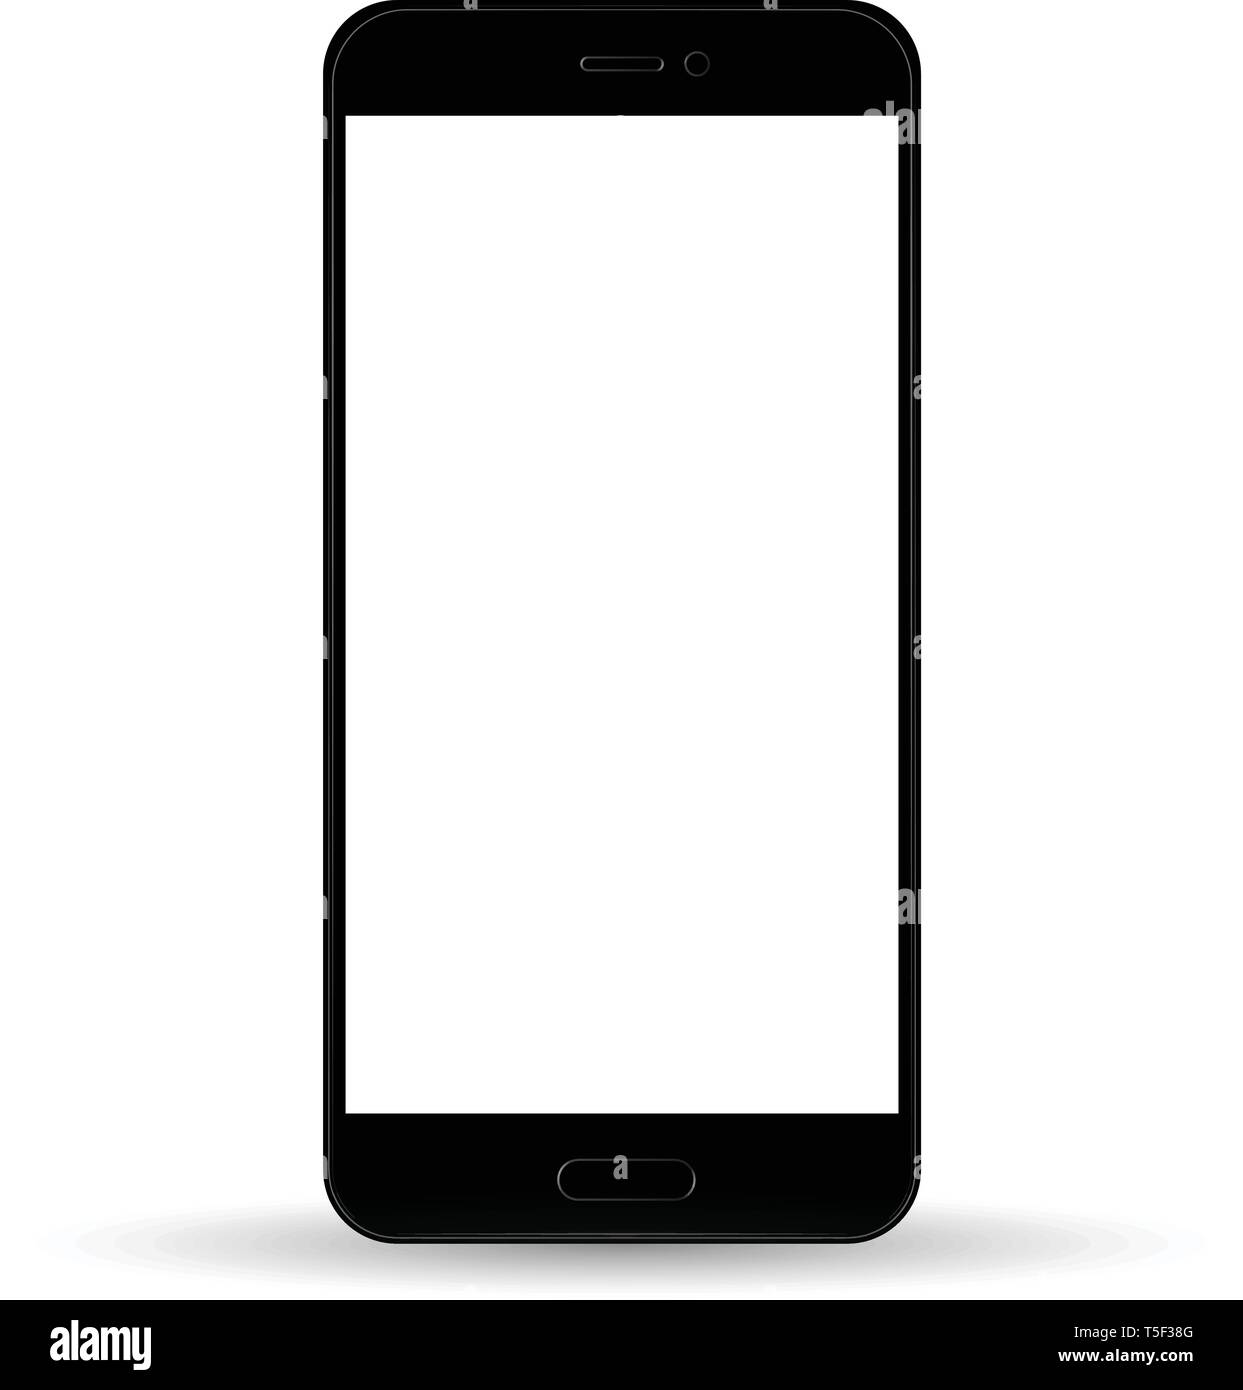 Smartphone In Iphone Style Black Color With Blank Touch Screen